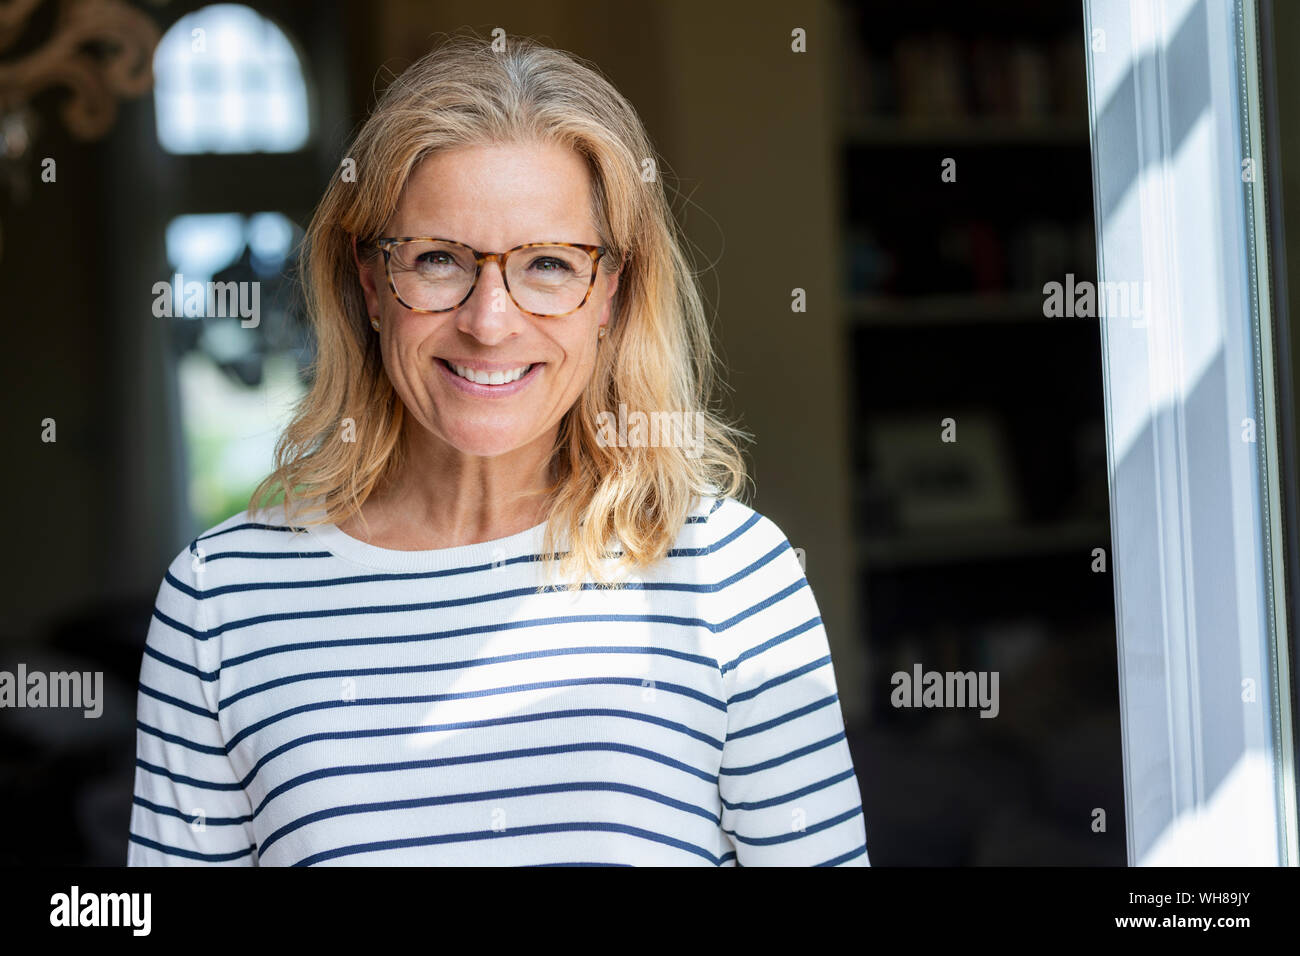 Portrait of smiling mature woman wearing glasses Stock Photo